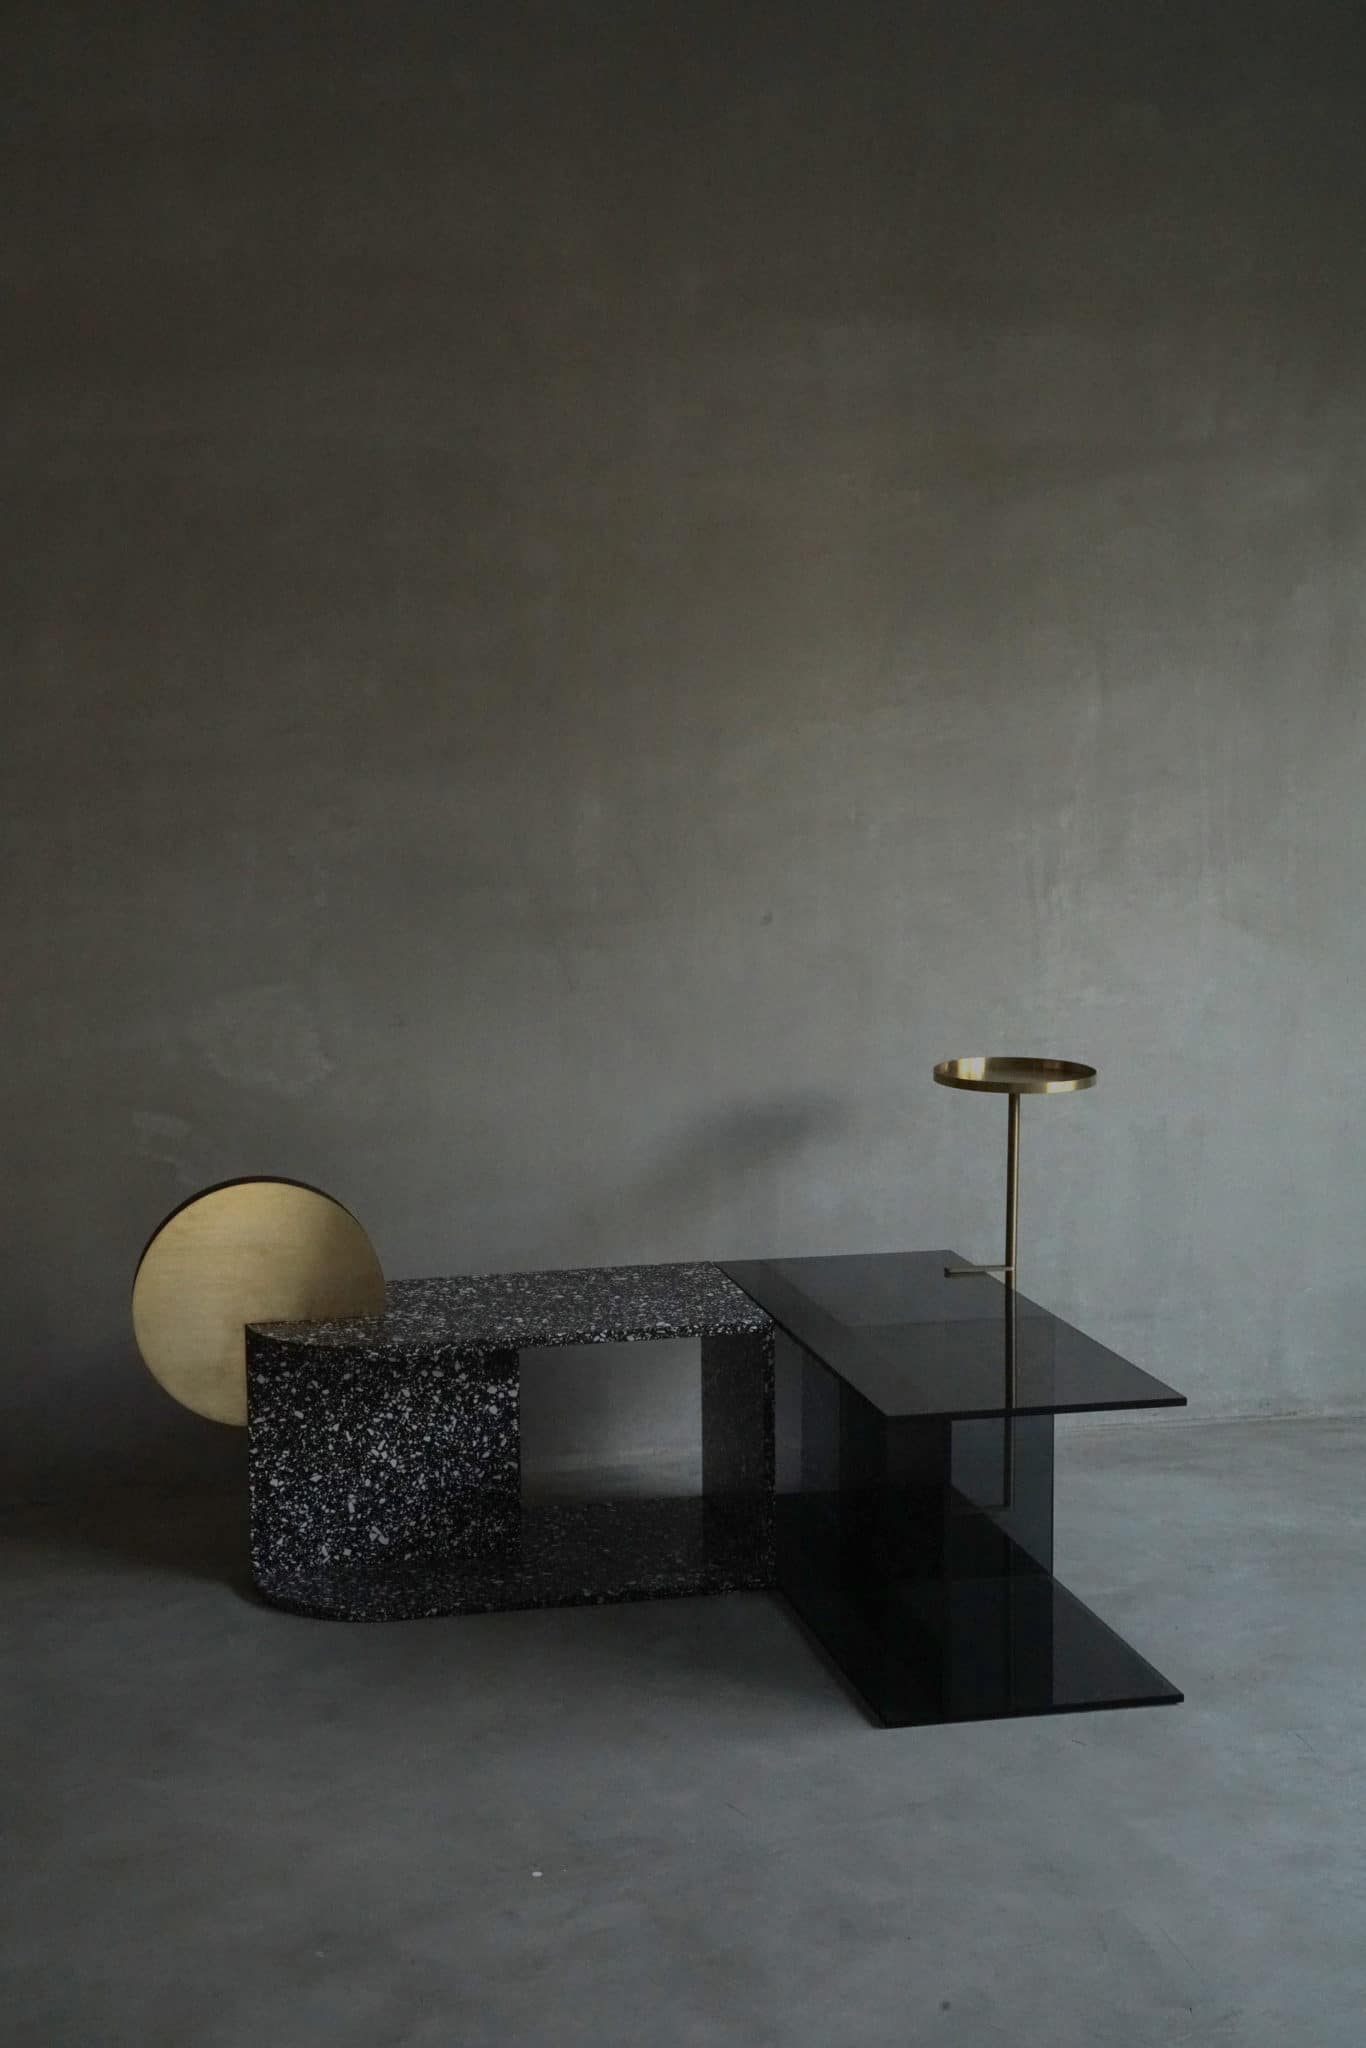 On the occasion of Maison&Objet, Urbancraft presented new works including terrazzo, glass and marble low tables.